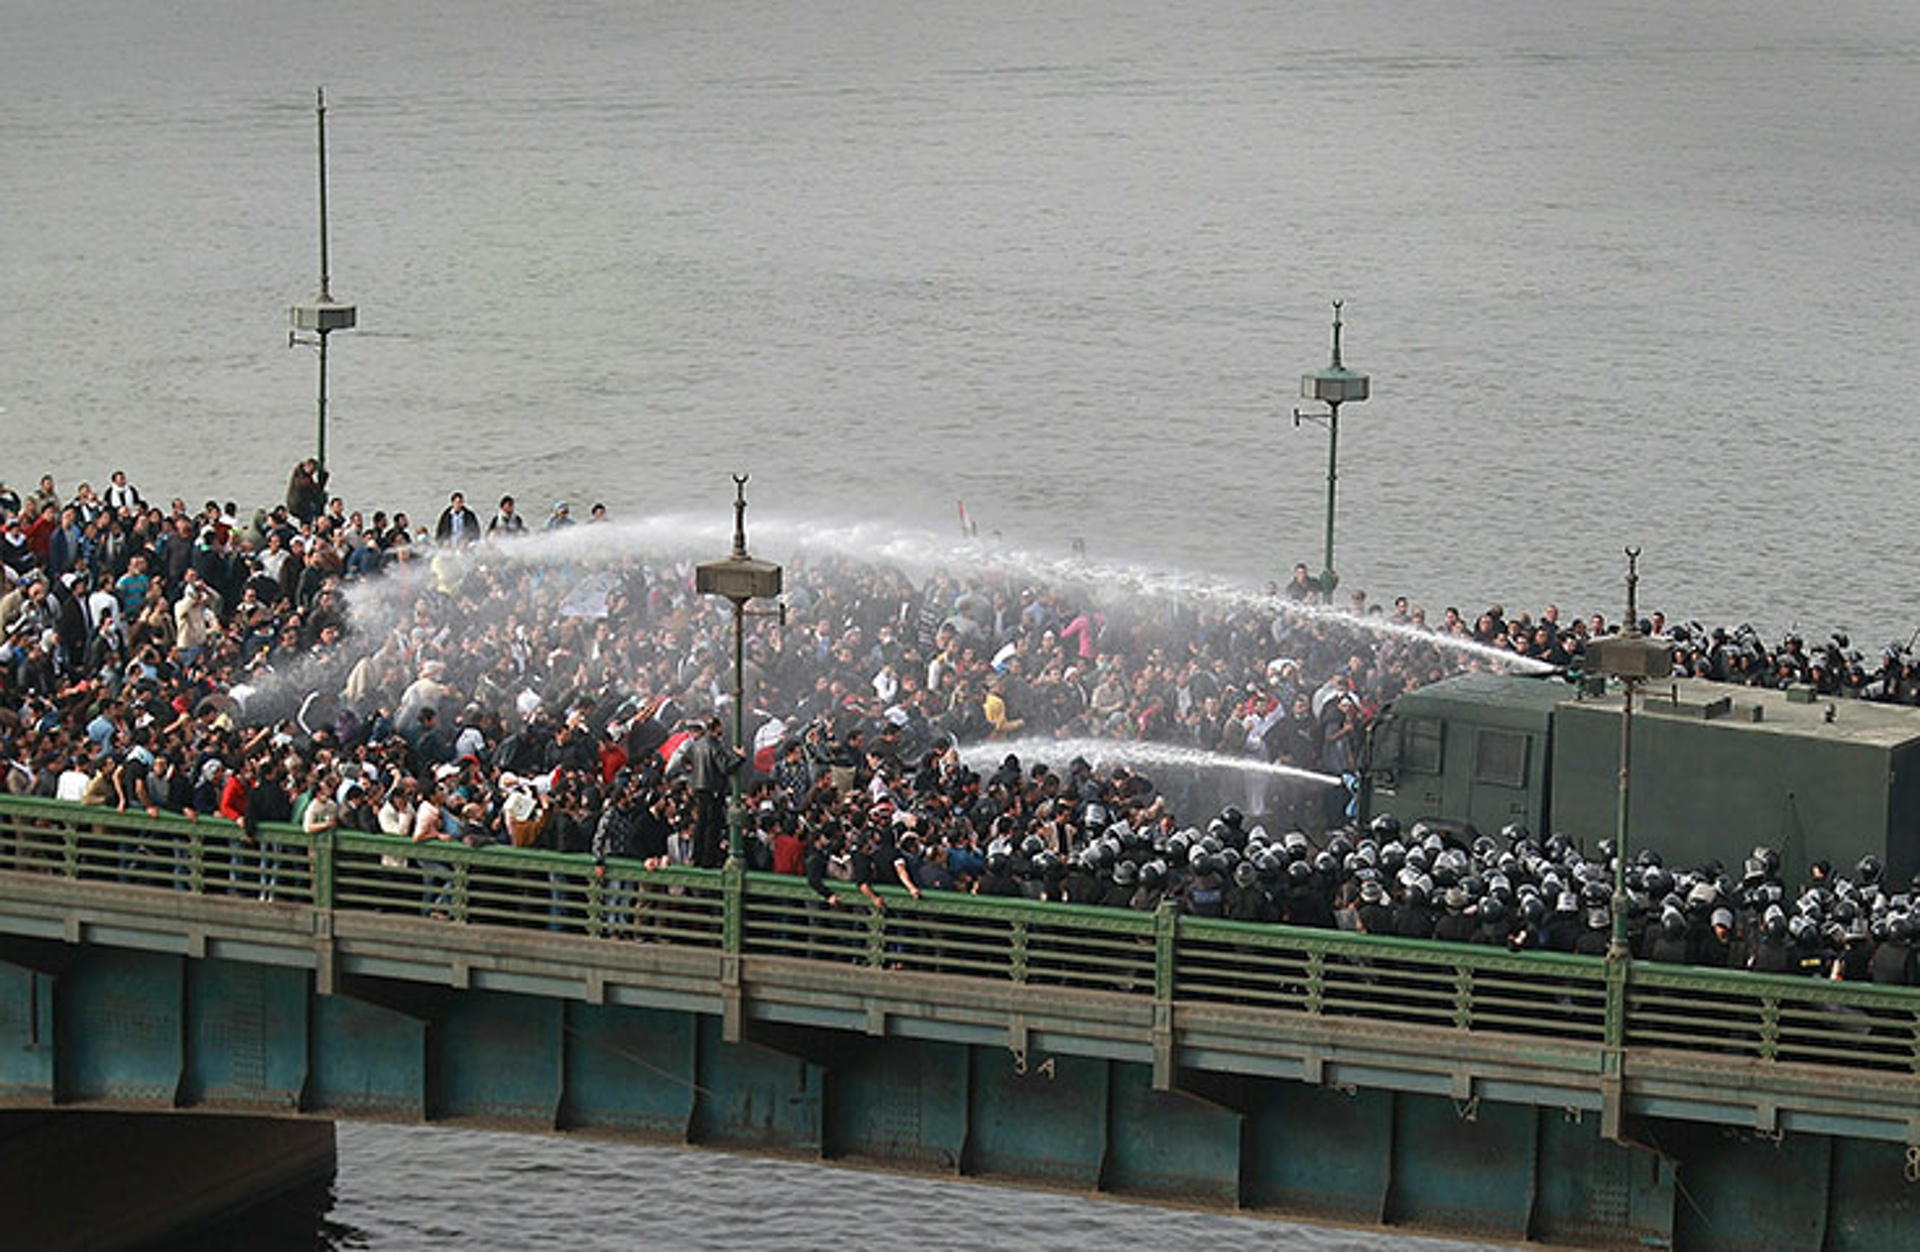 Riot police use water cannons on protesters trying to cross the Kasr al-Nile bridge. Photo: Peter Macdiarmid, Getty Images